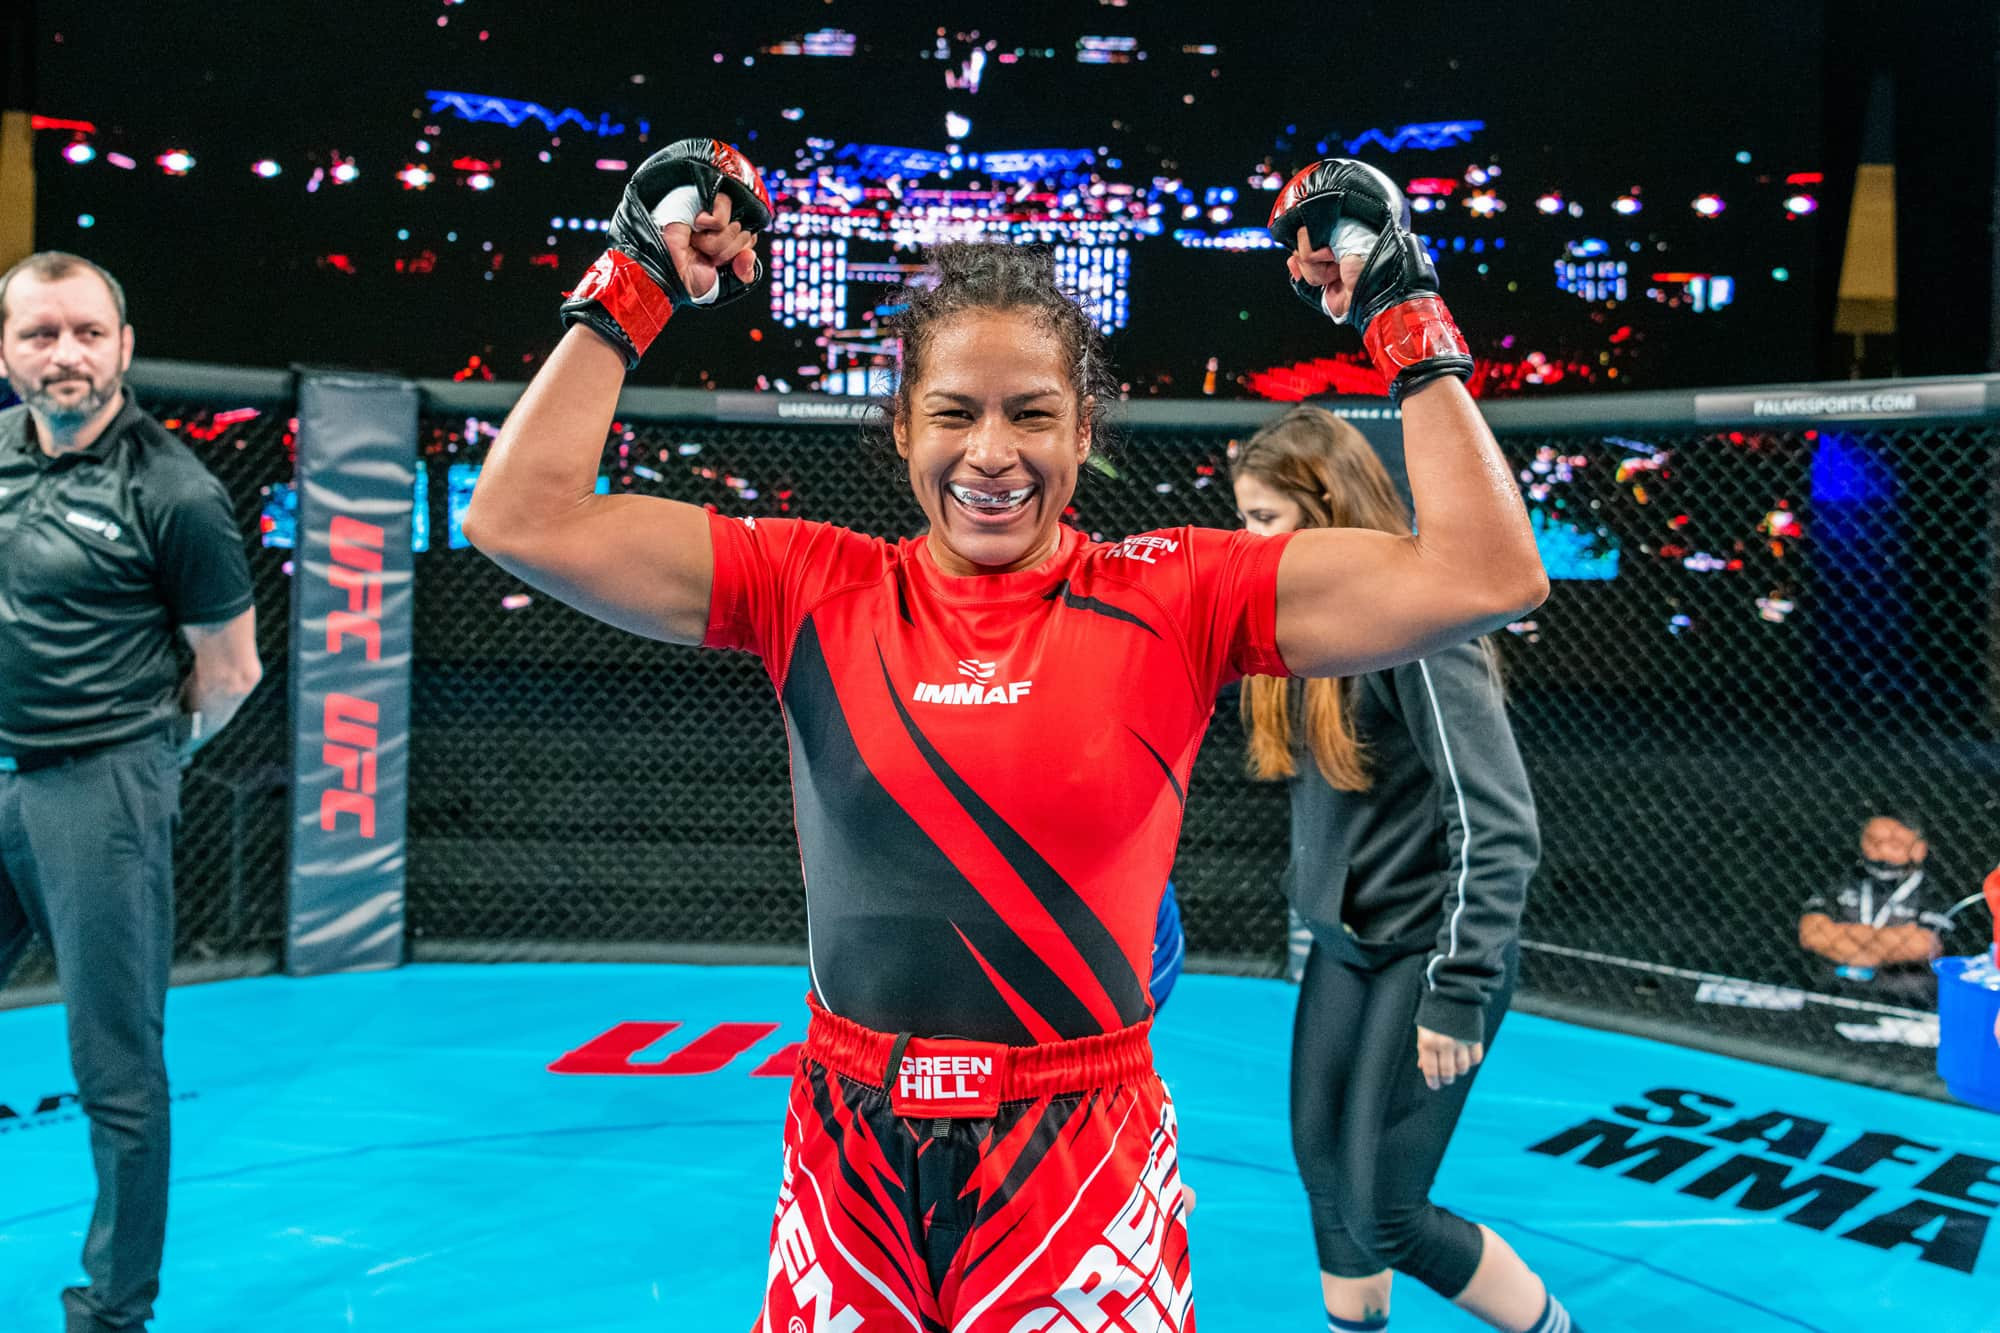 Giuliany Perea took silver for Brazil in the women's flyweight division at the IMMAF World Championships earlier this year and will hope to be a contender at the Pan American Championships in Monterrey later this month ©IMMAF